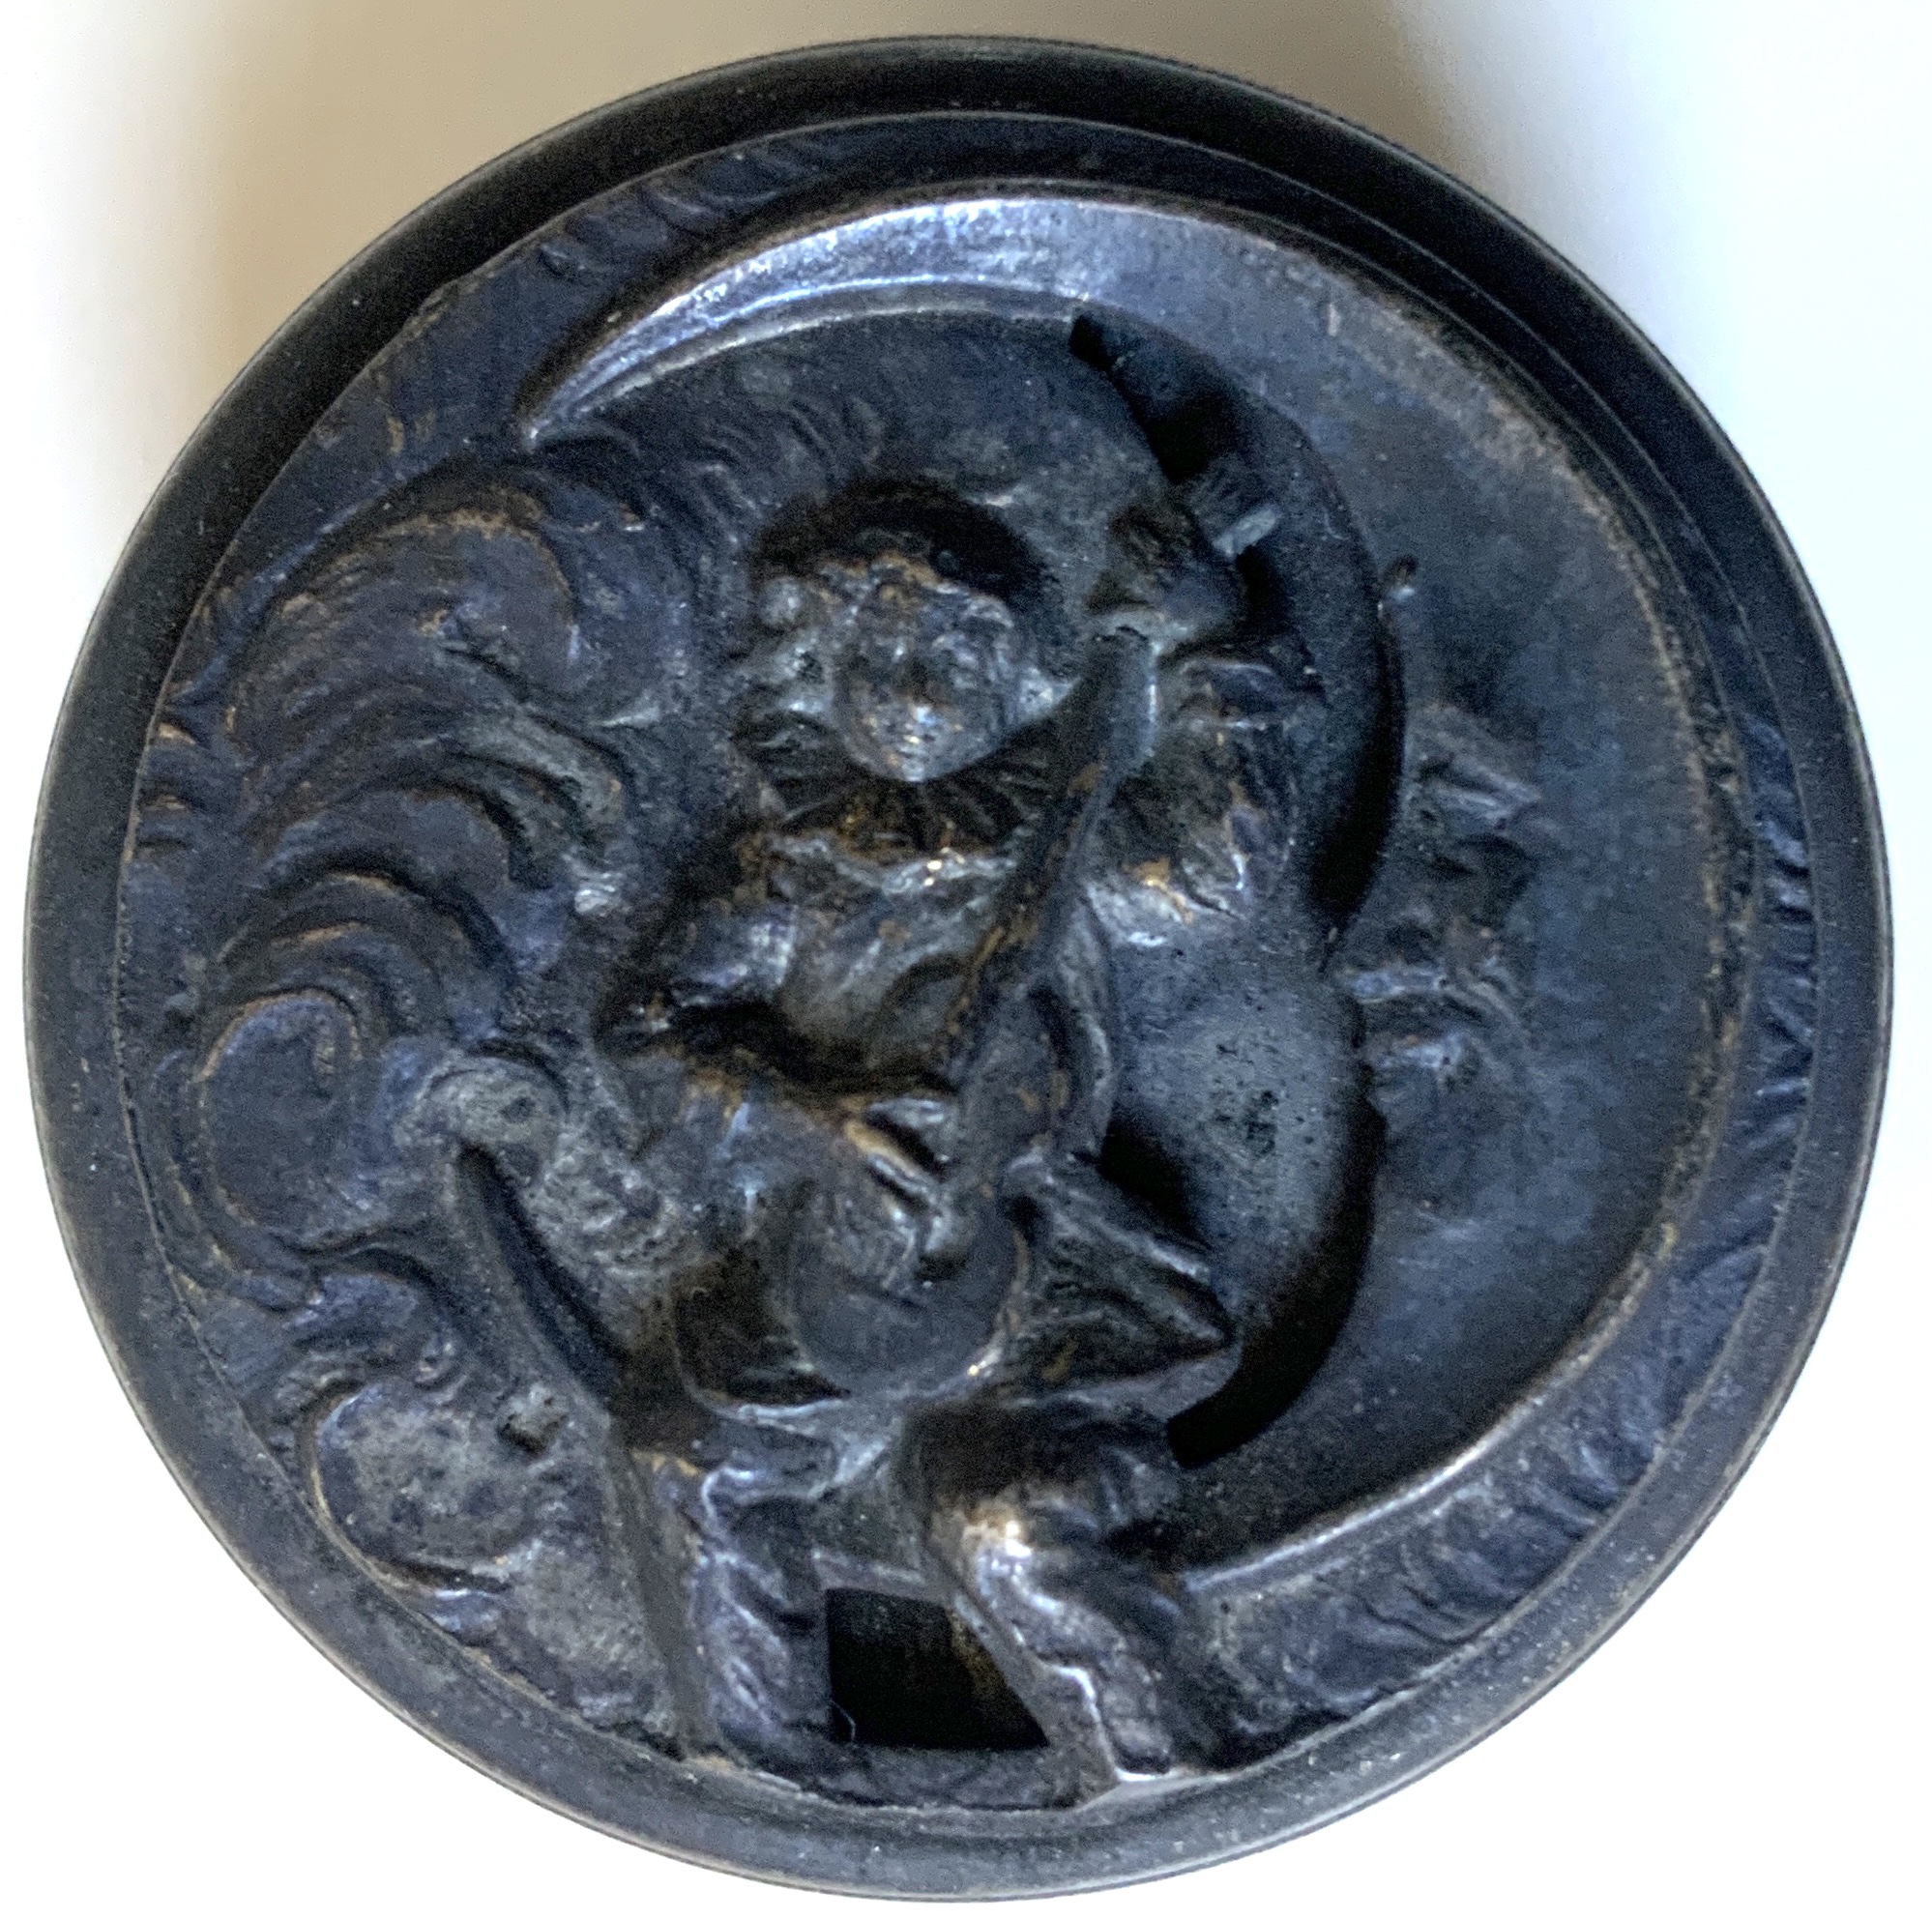 M290	AN EARLY SMALL PEWTER CONTAINER WITH A RELIEF ON TOP OF A CHERUB BOY SITTING IN THE LOWER HOOK OF A SMILING CRESCENT MOON PLAYING GUITAR